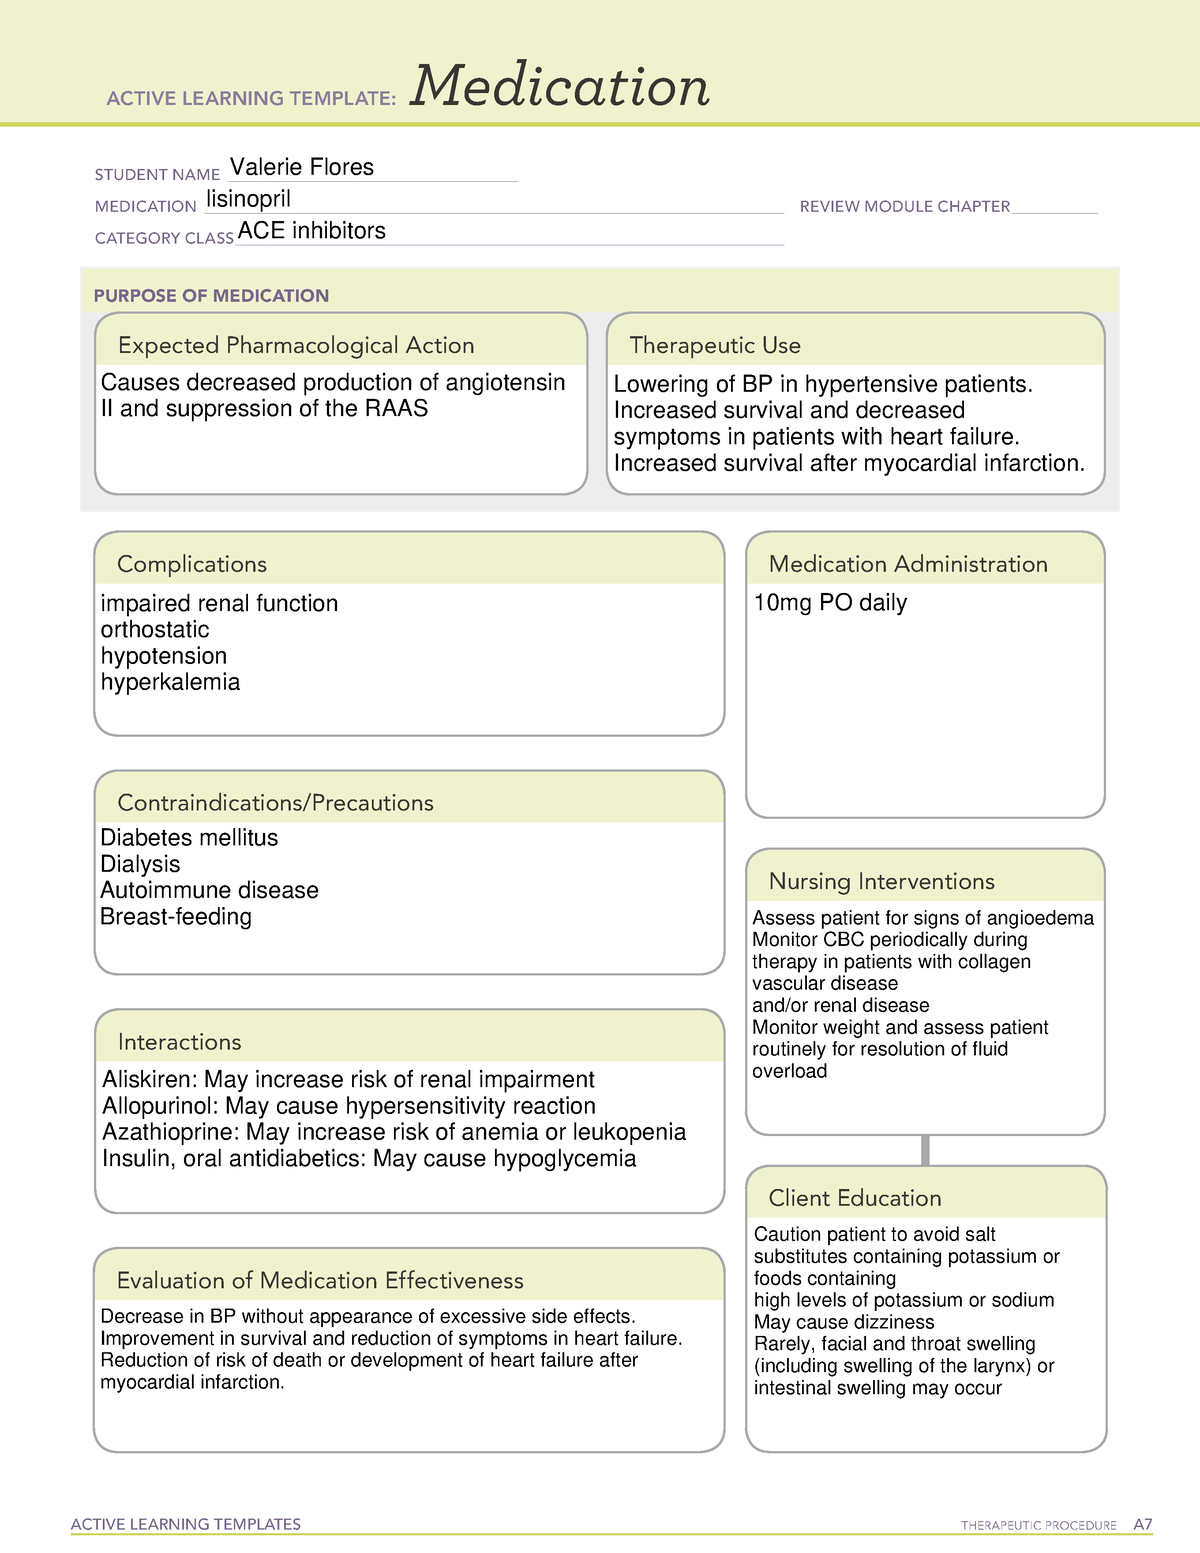 ATI MED FORM lisinopril ACTIVE LEARNING TEMPLATES THERAPEUTIC